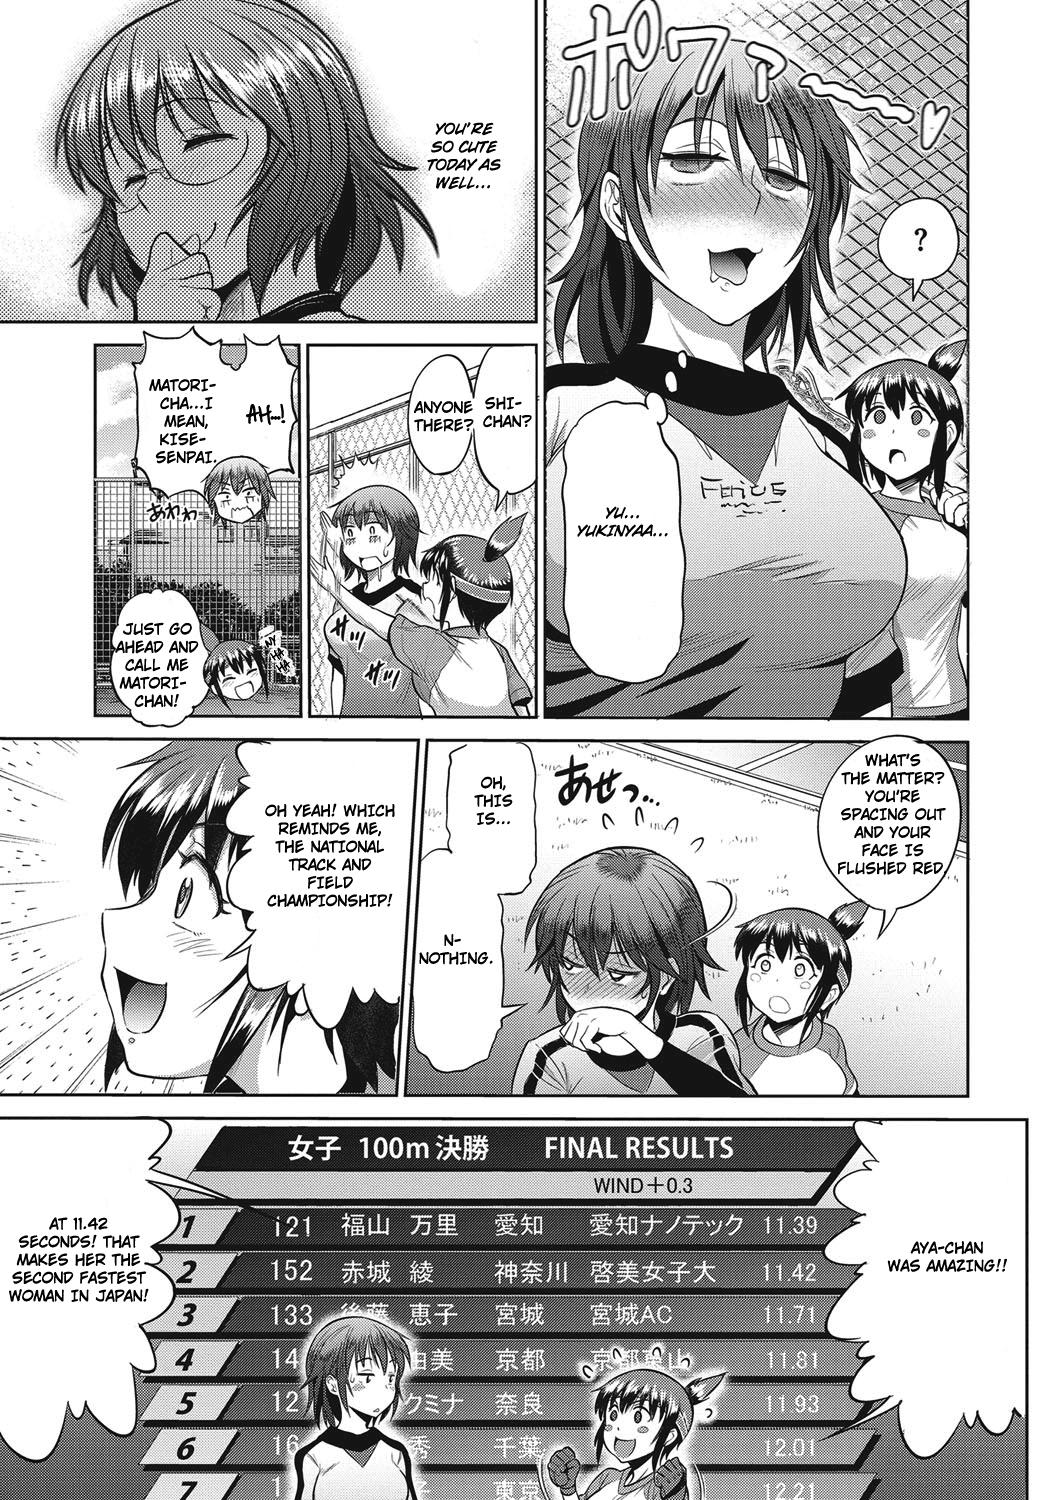 India [DISTANCE] Joshi Lacu! - Girls Lacrosse Club ~2 Years Later~ Ch. 3 (COMIC ExE 04) [English] [TripleSevenScans] [Digital] Shoes - Page 11